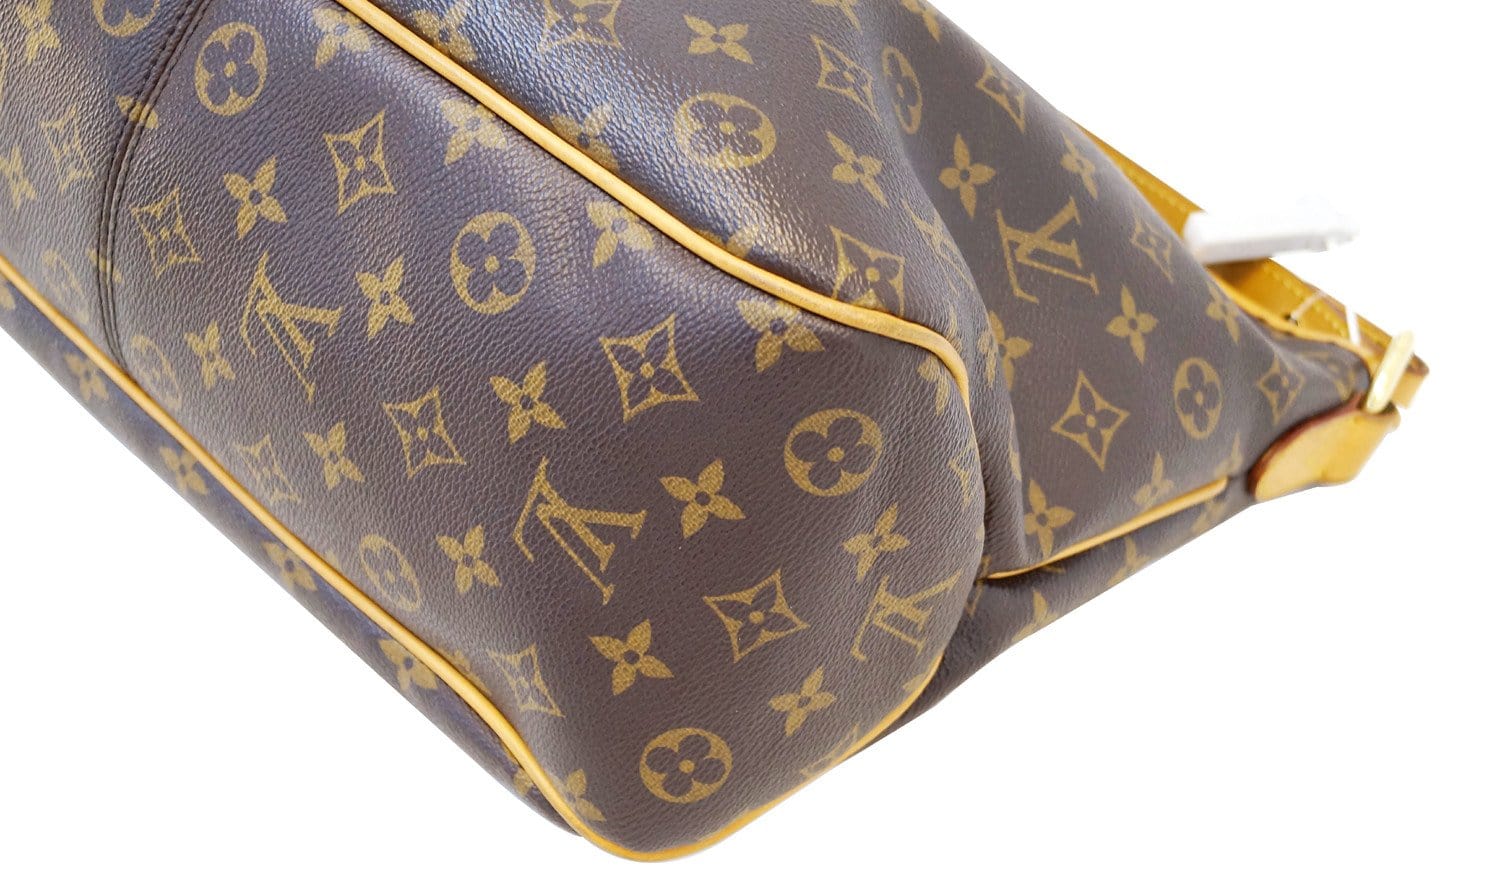 Authentic Used Louis Vuitton Delightful Hobo Bag in Monogram - ShopperBoard